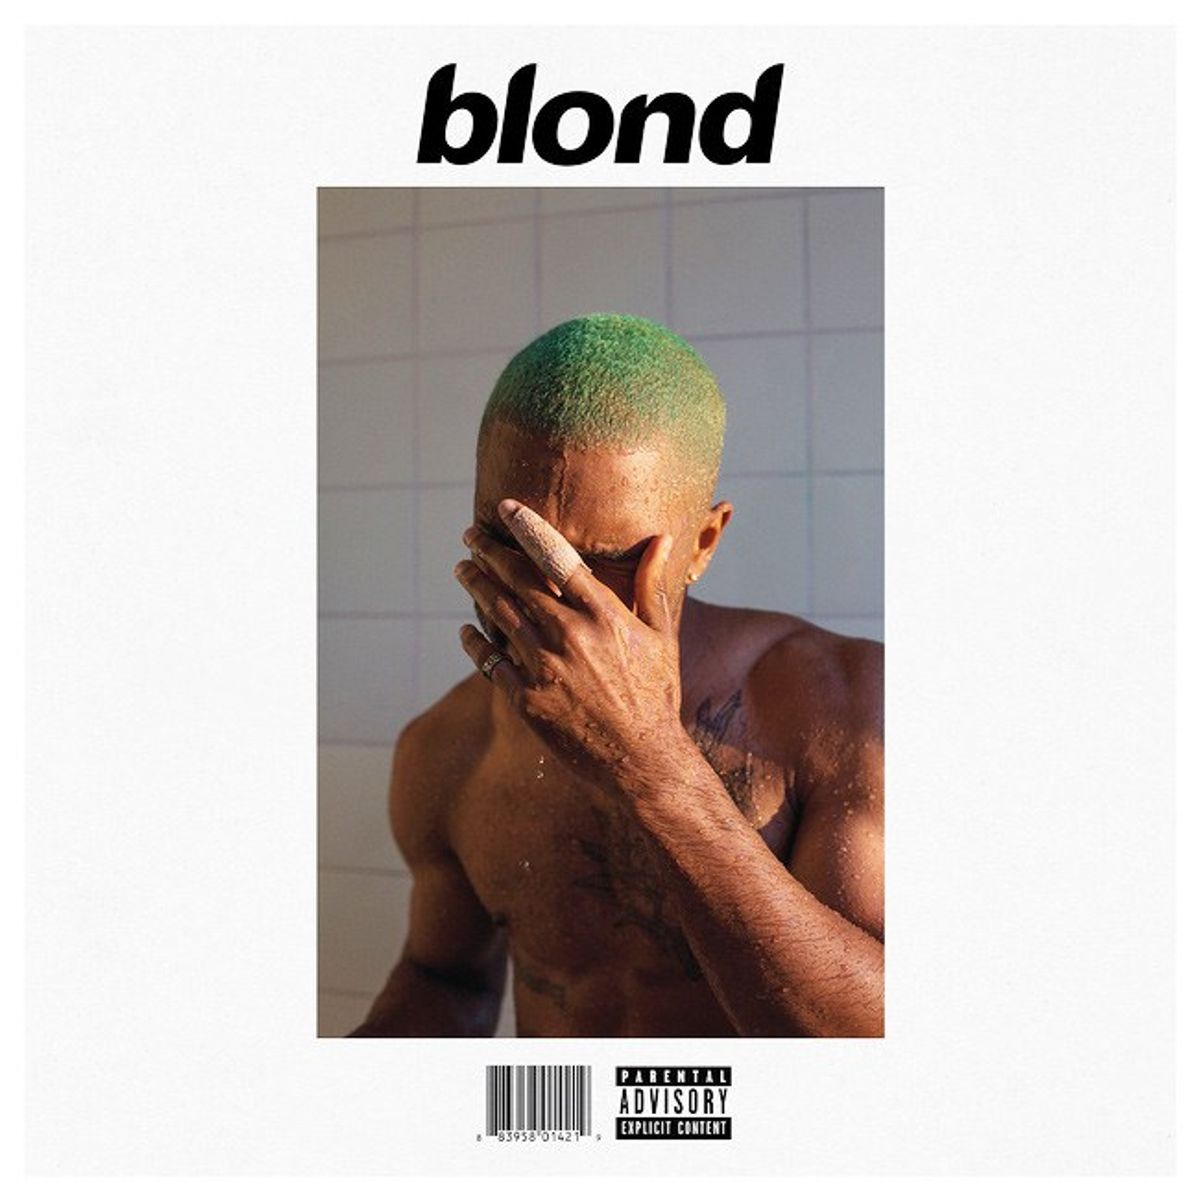 5 Things To Take Away From Frank Ocean's 'Blond'